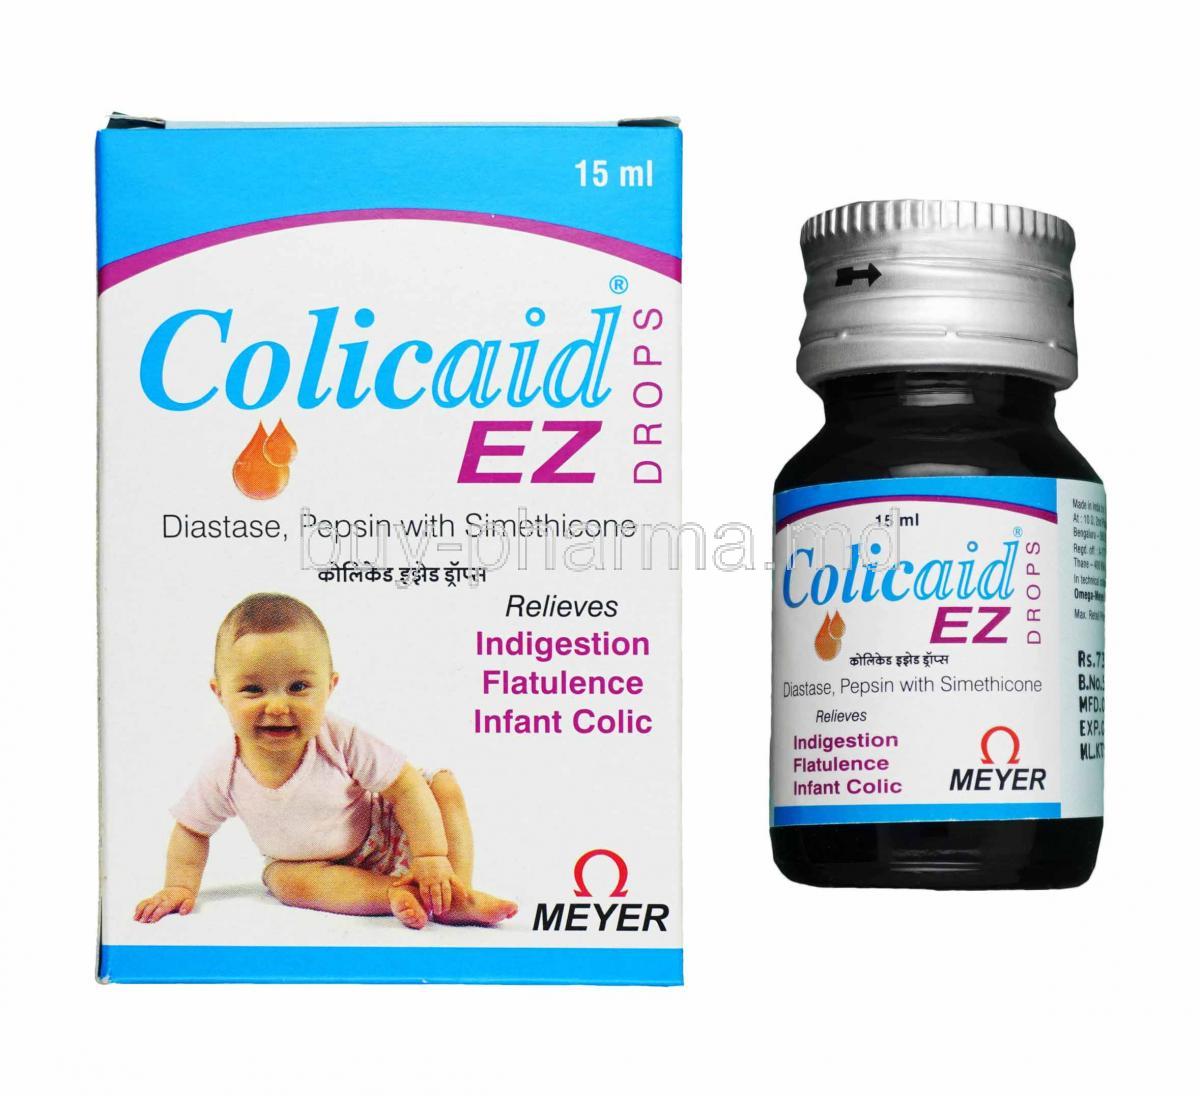 Colicaid EZ Oral Drops box and bottle